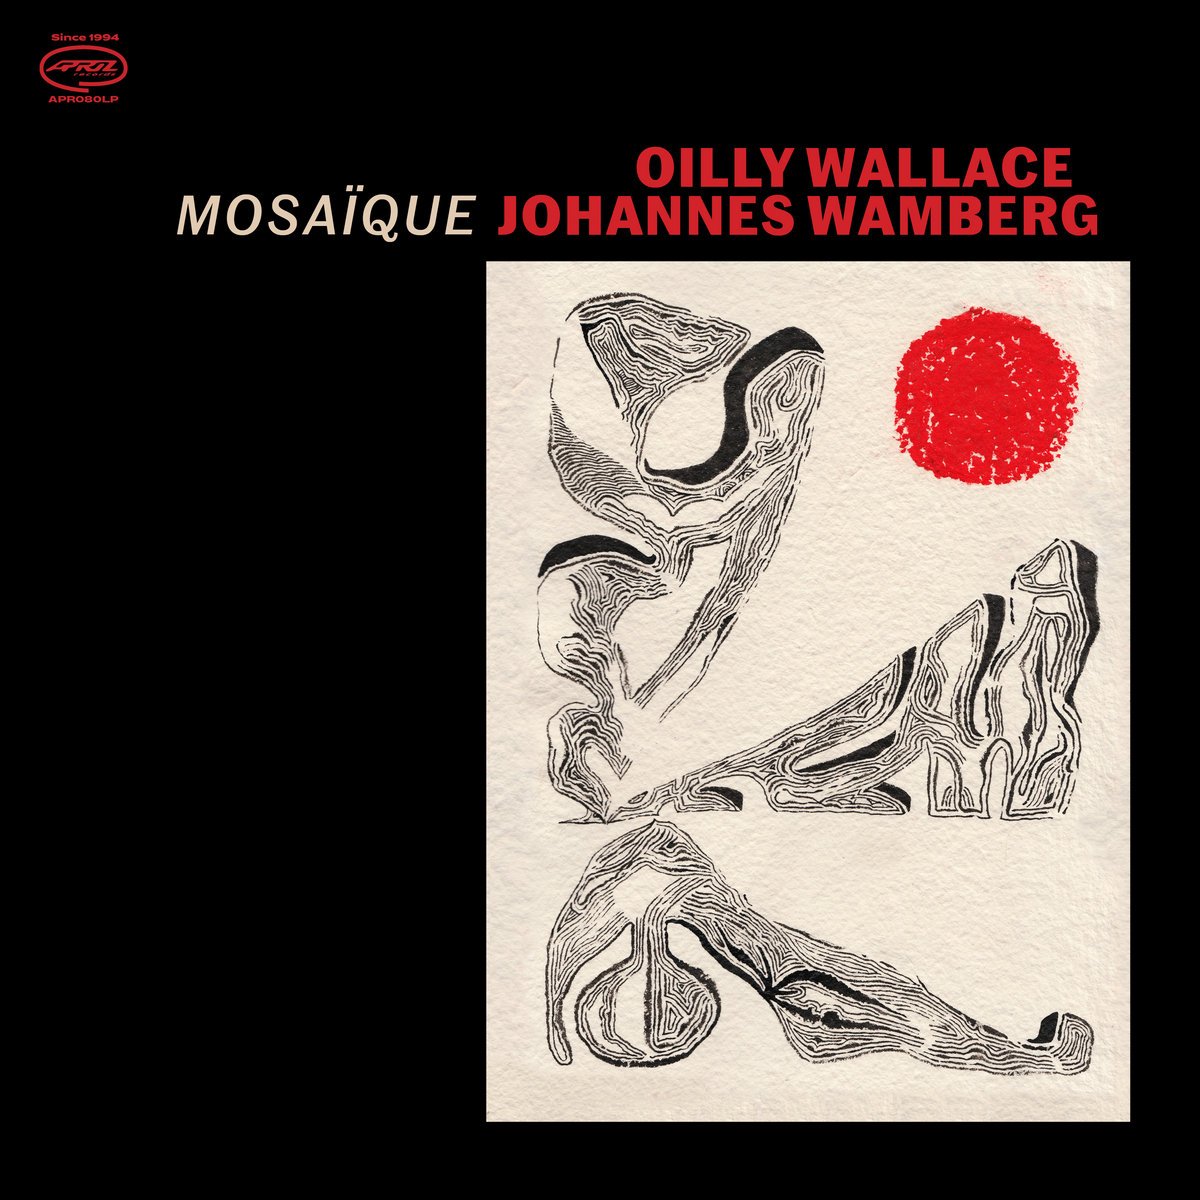 CD Shop - OILLY, WALLACE & JOHANNES MOSAIQUE